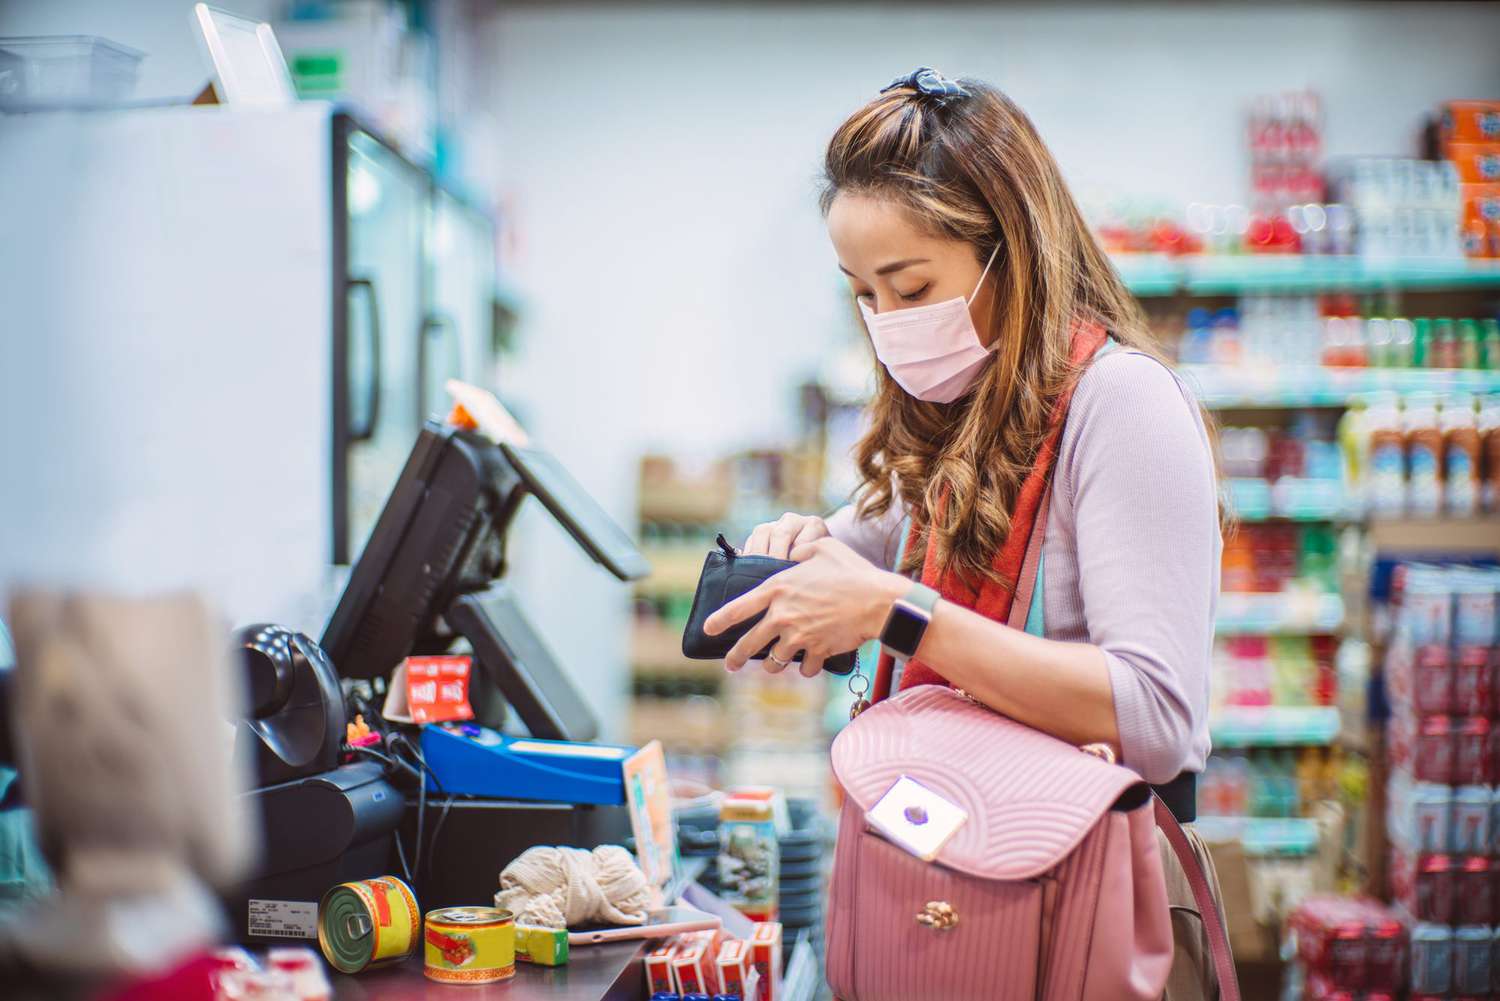 woman with medical face mask making payment in groceries store